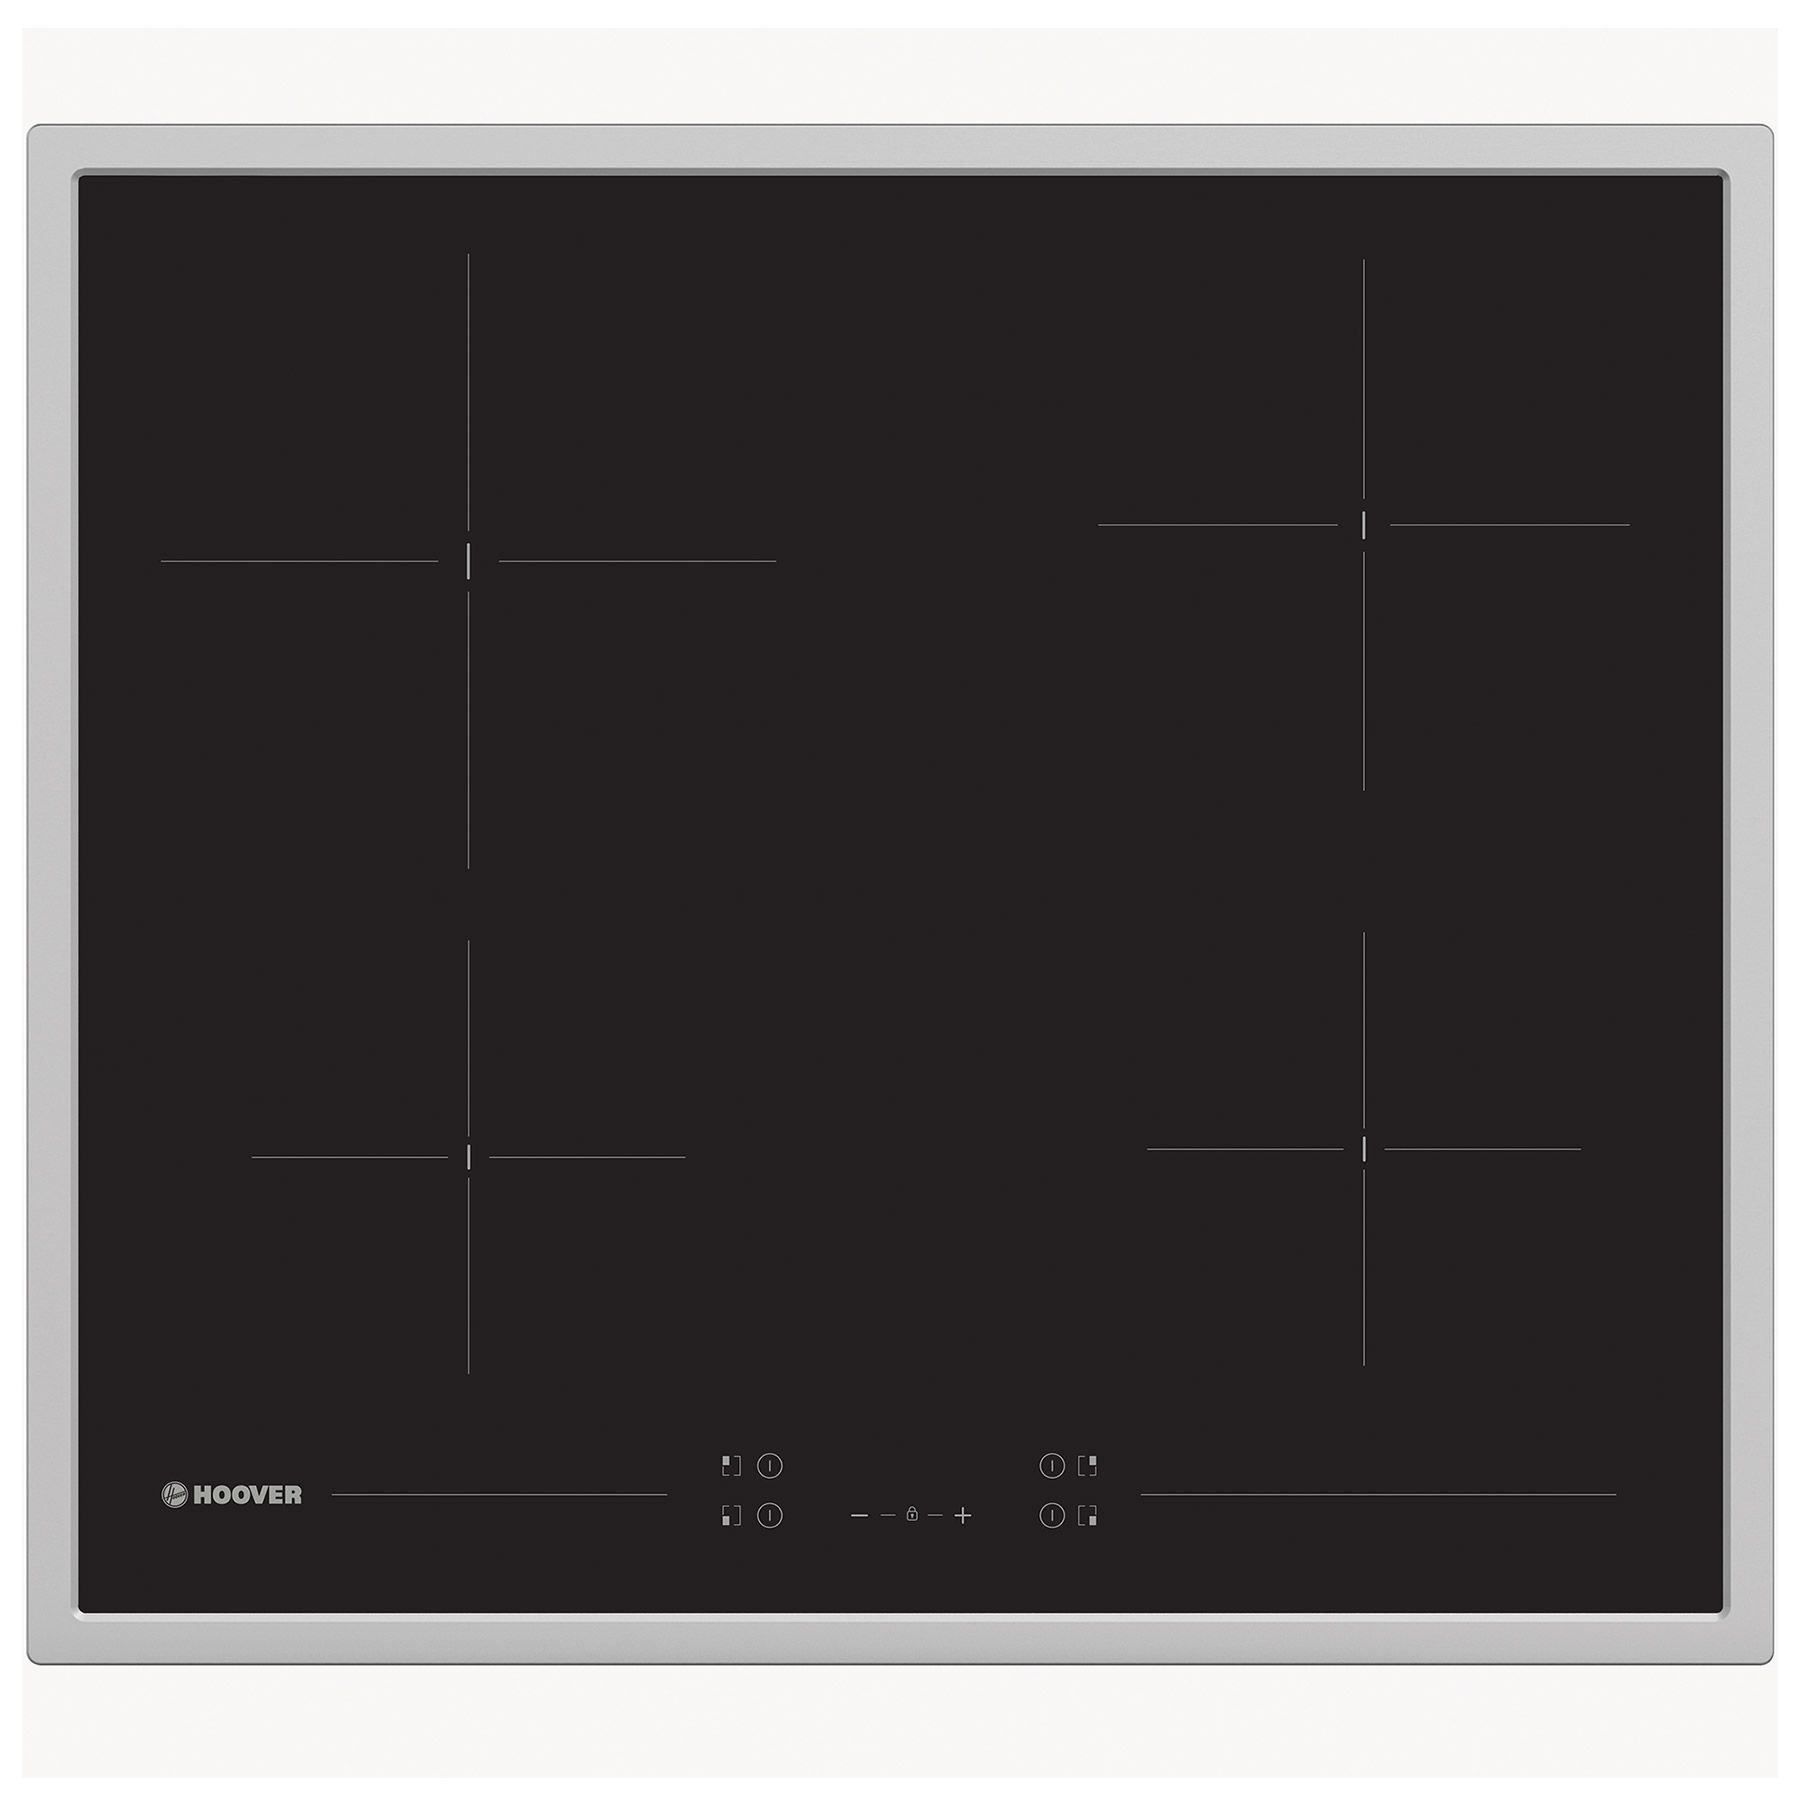 Image of Hoover HH64FC 60cm 4 Zone Ceramic Hob in Black with St Steel Trim